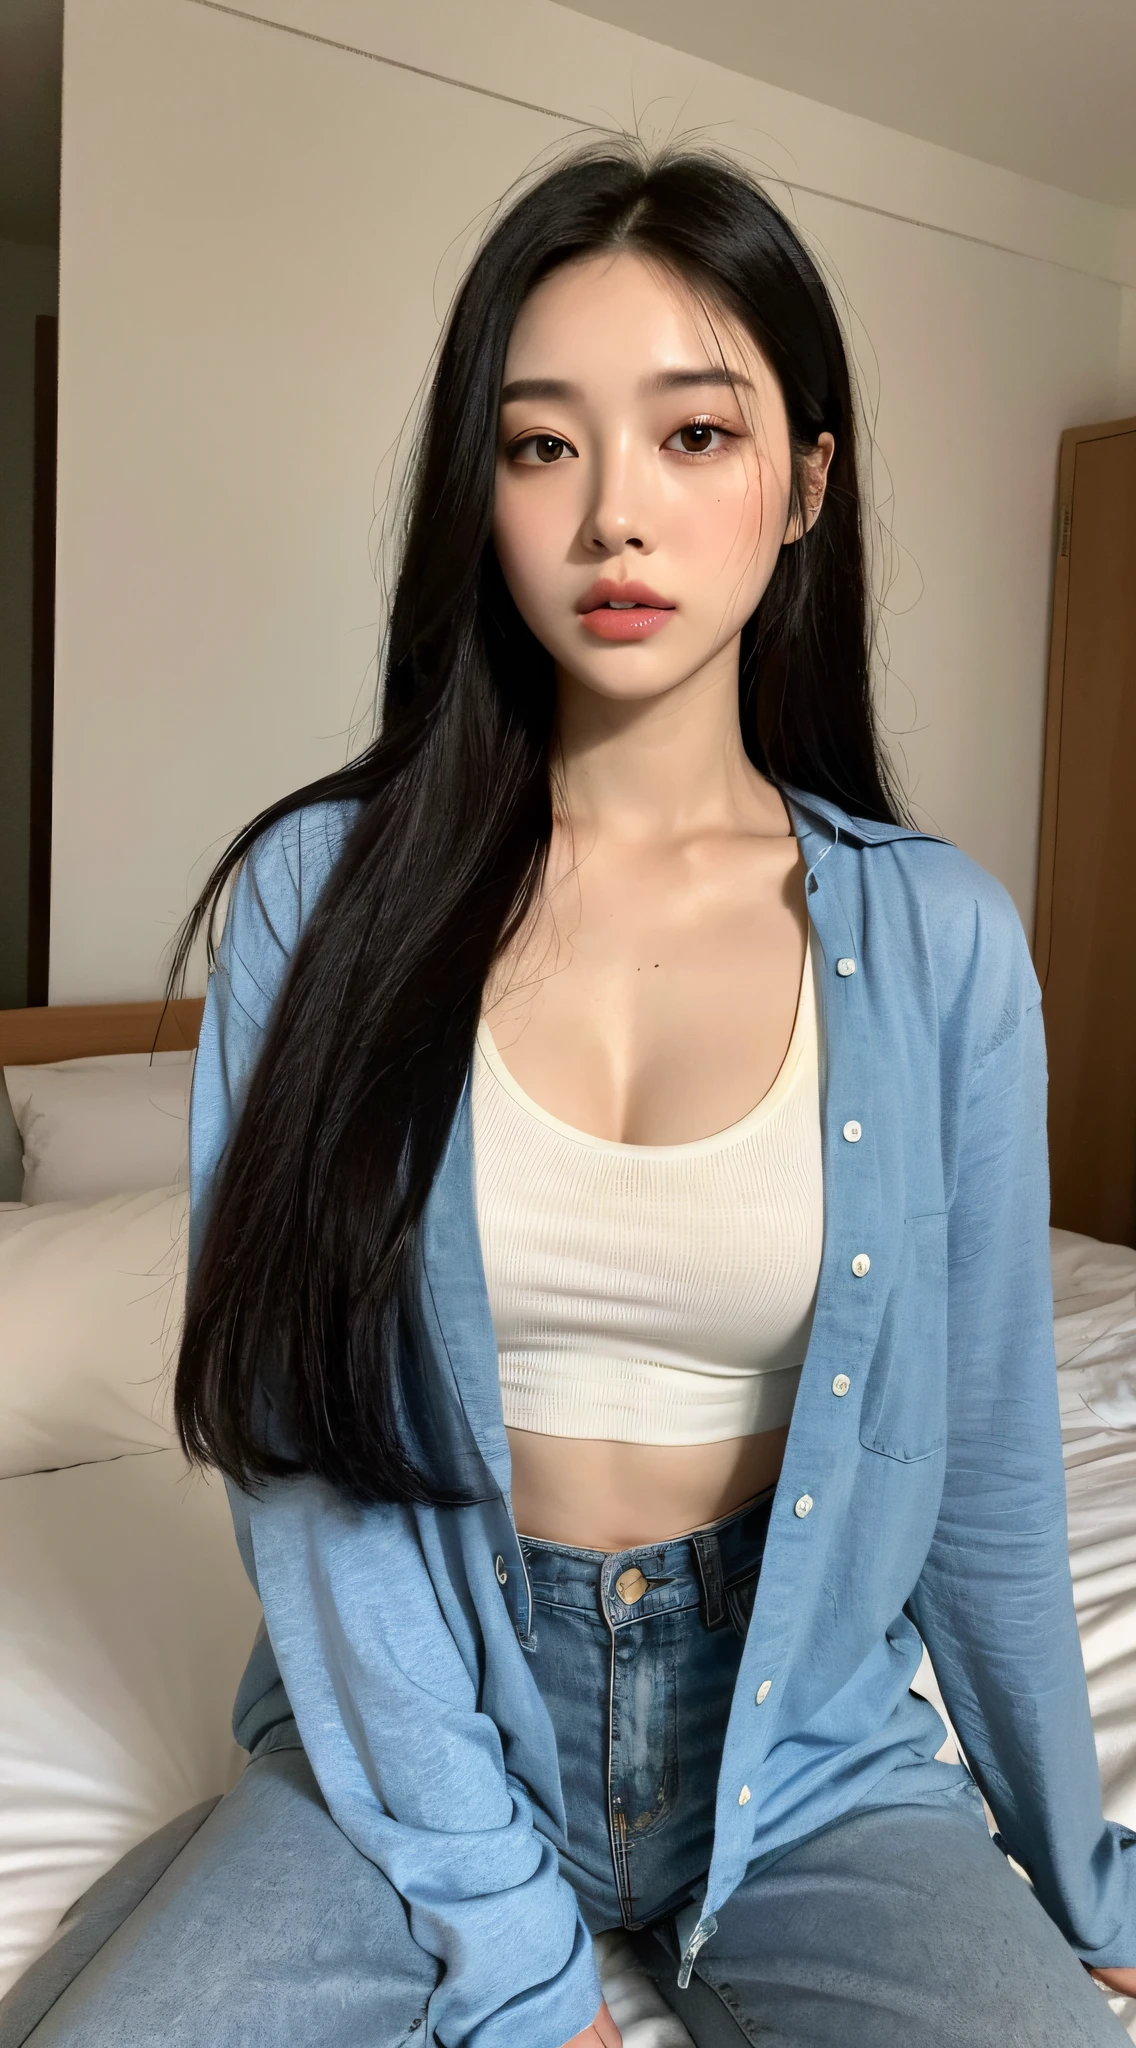 ((Top quality, 8k, Masterpiece: 1.3)), beauty, hidden face, 1 girl, beauty: 1.3, slender abs: 1.1, large men's shirt (loose: 1.4) exposed, full chest, long black hair, (kneeling on bed), ultra-detailed face, highly detailed lips, detailed eyes, double eyelids, strict head and body ratio: 1.5,